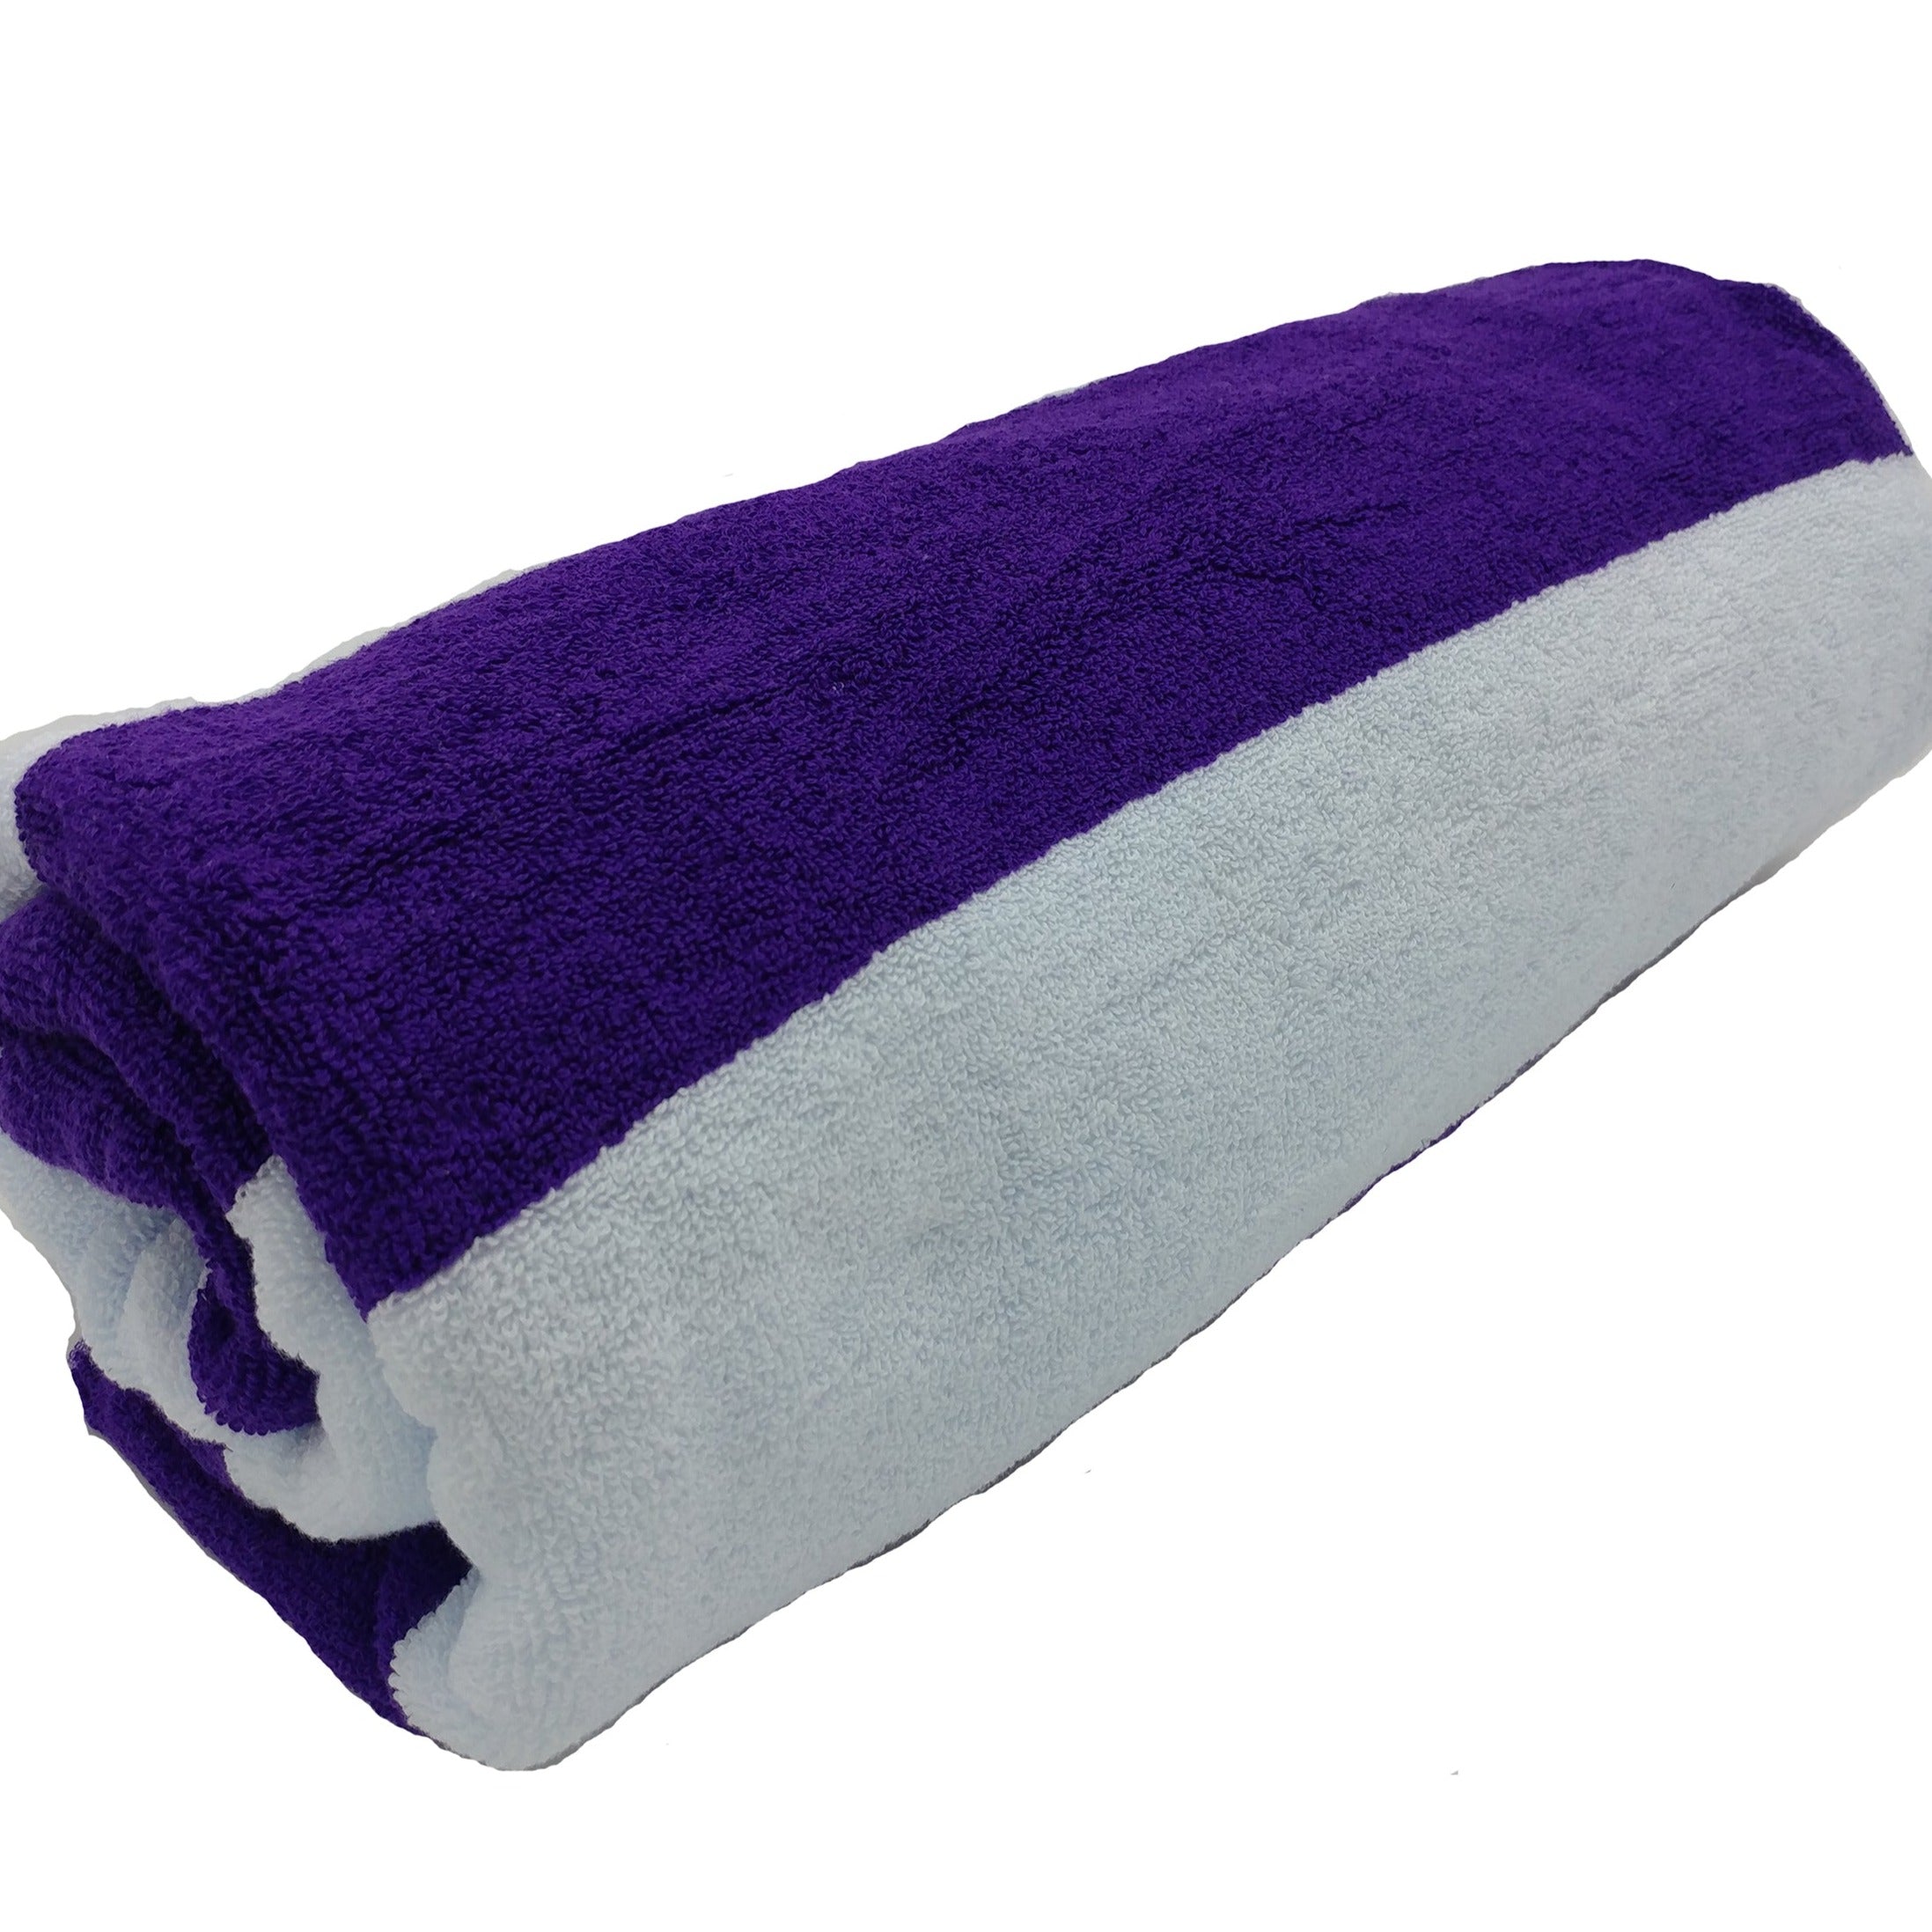 Terry Beach Towels - beach towel wrap with.